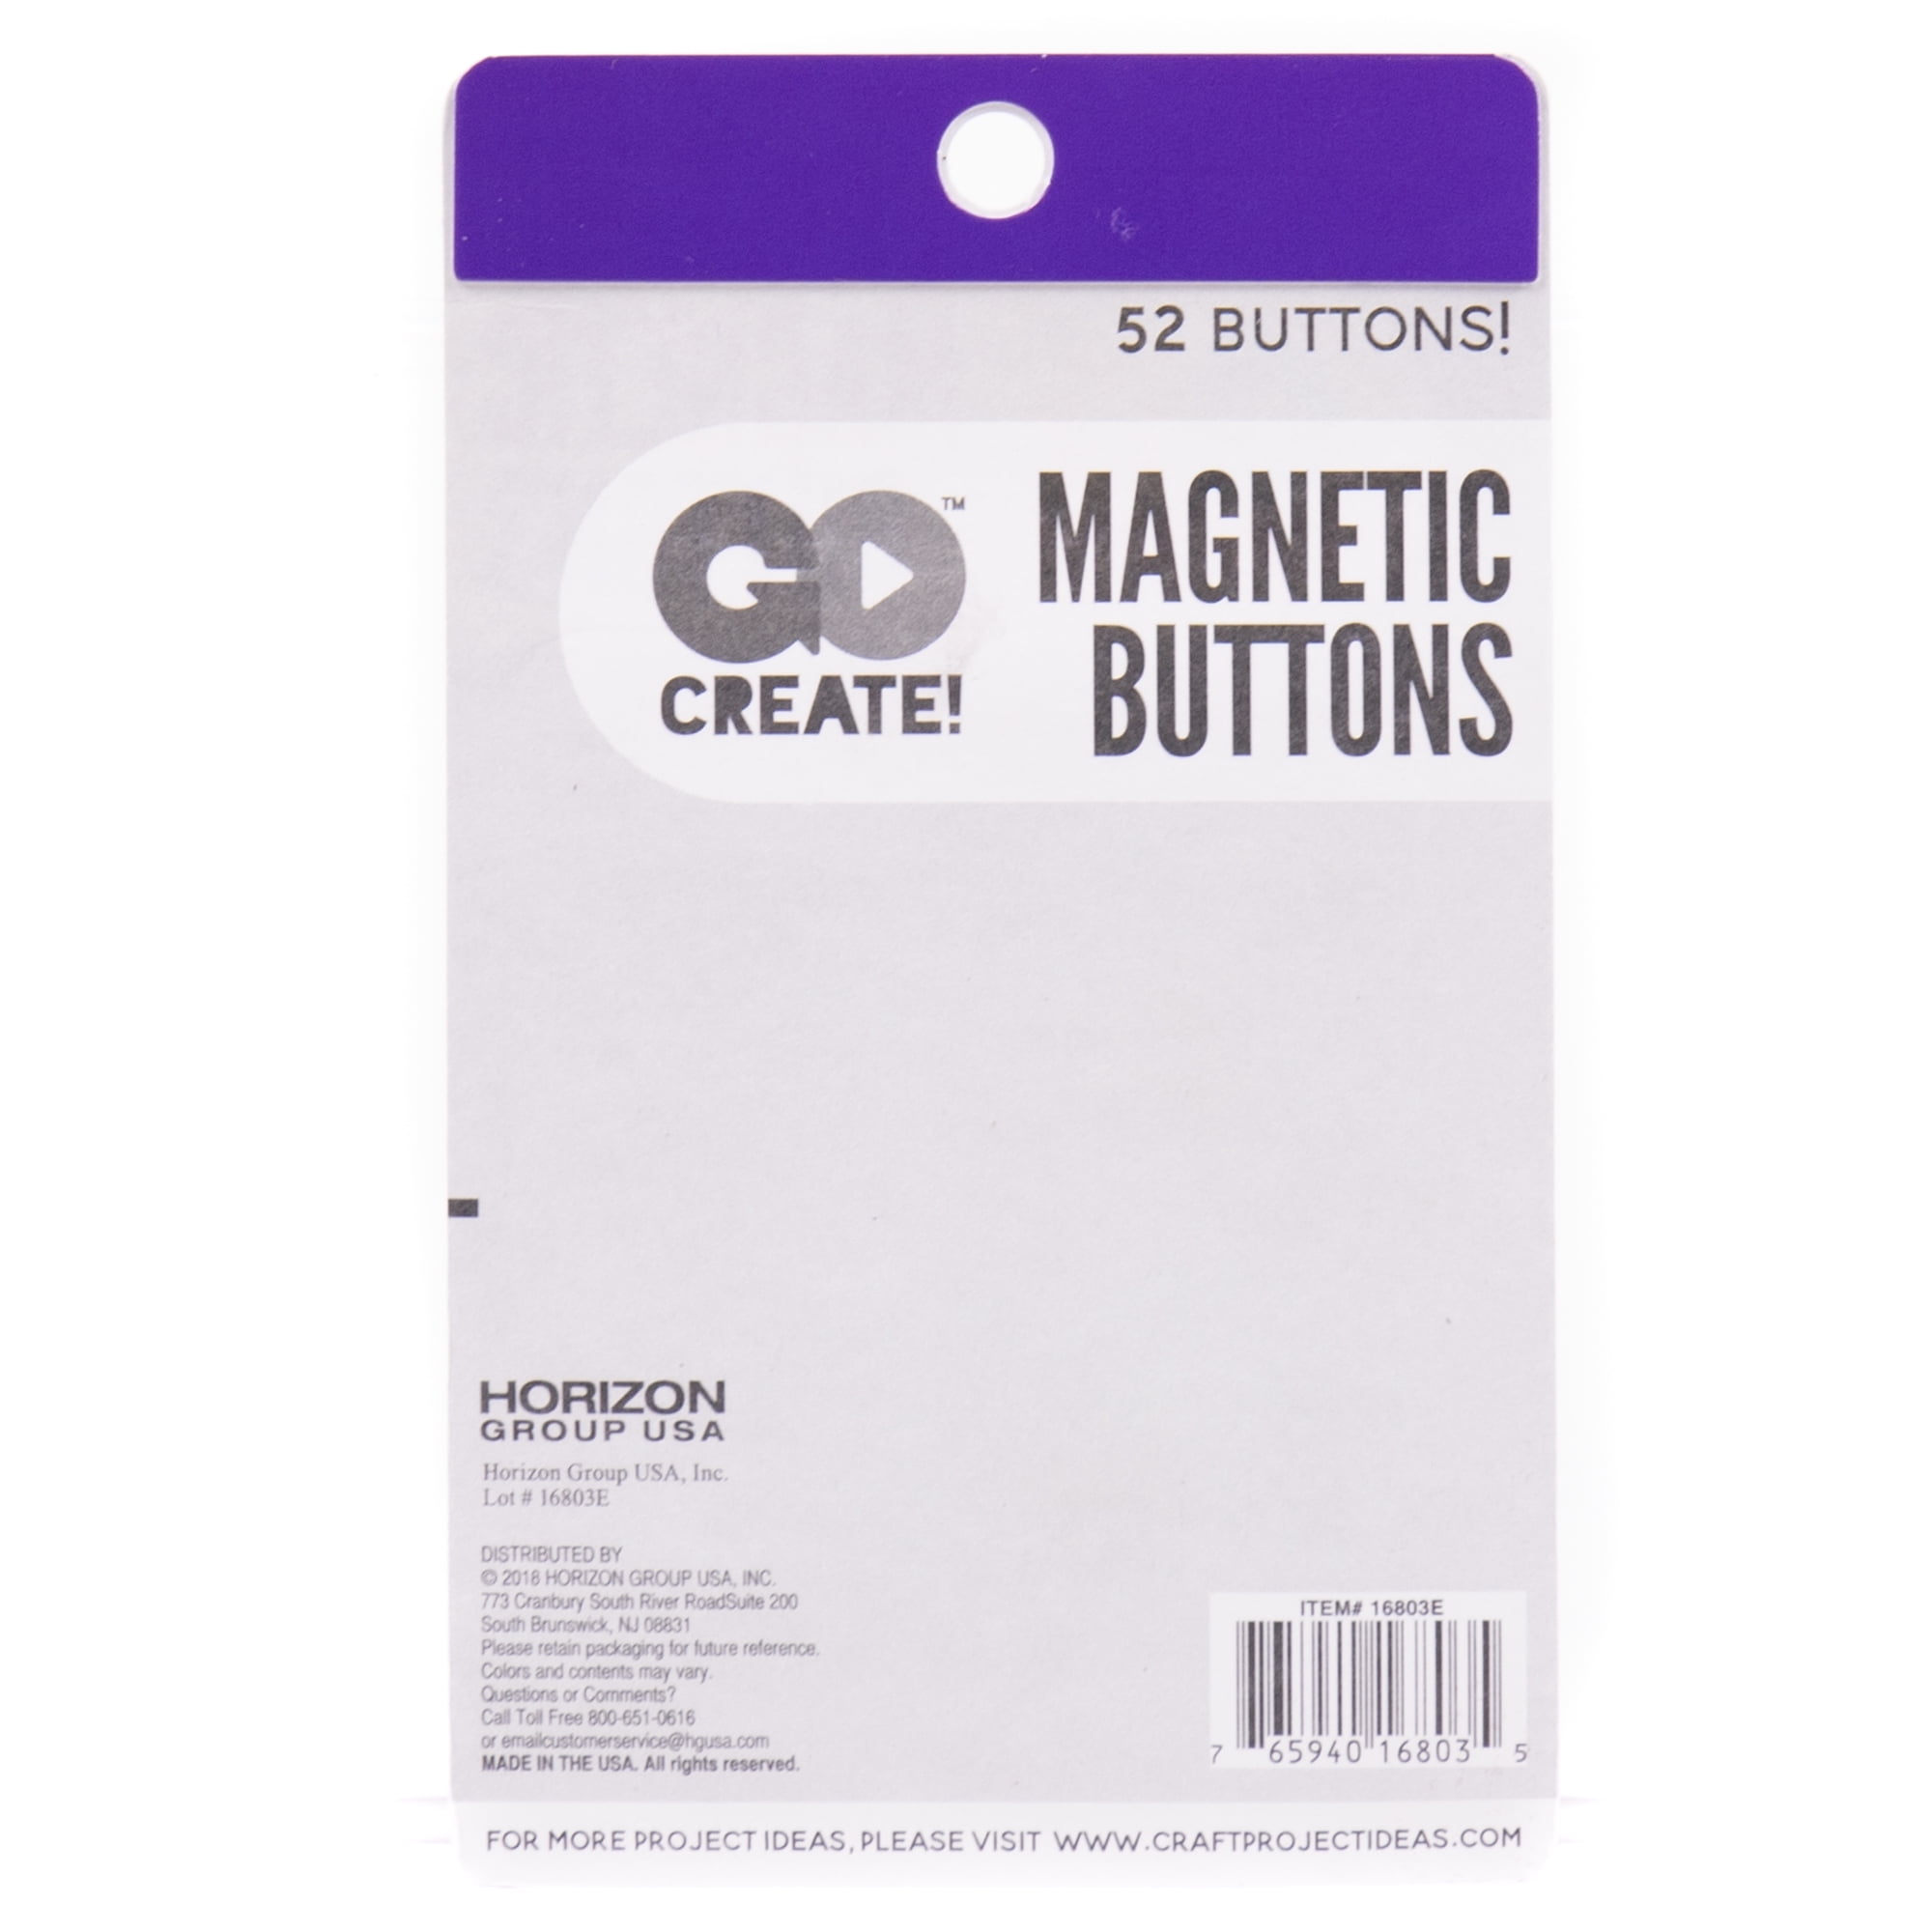 Hello Hobby Small Magnetic Buttons, 52-Pack, Boys and Girls, Child, Ages 5+  